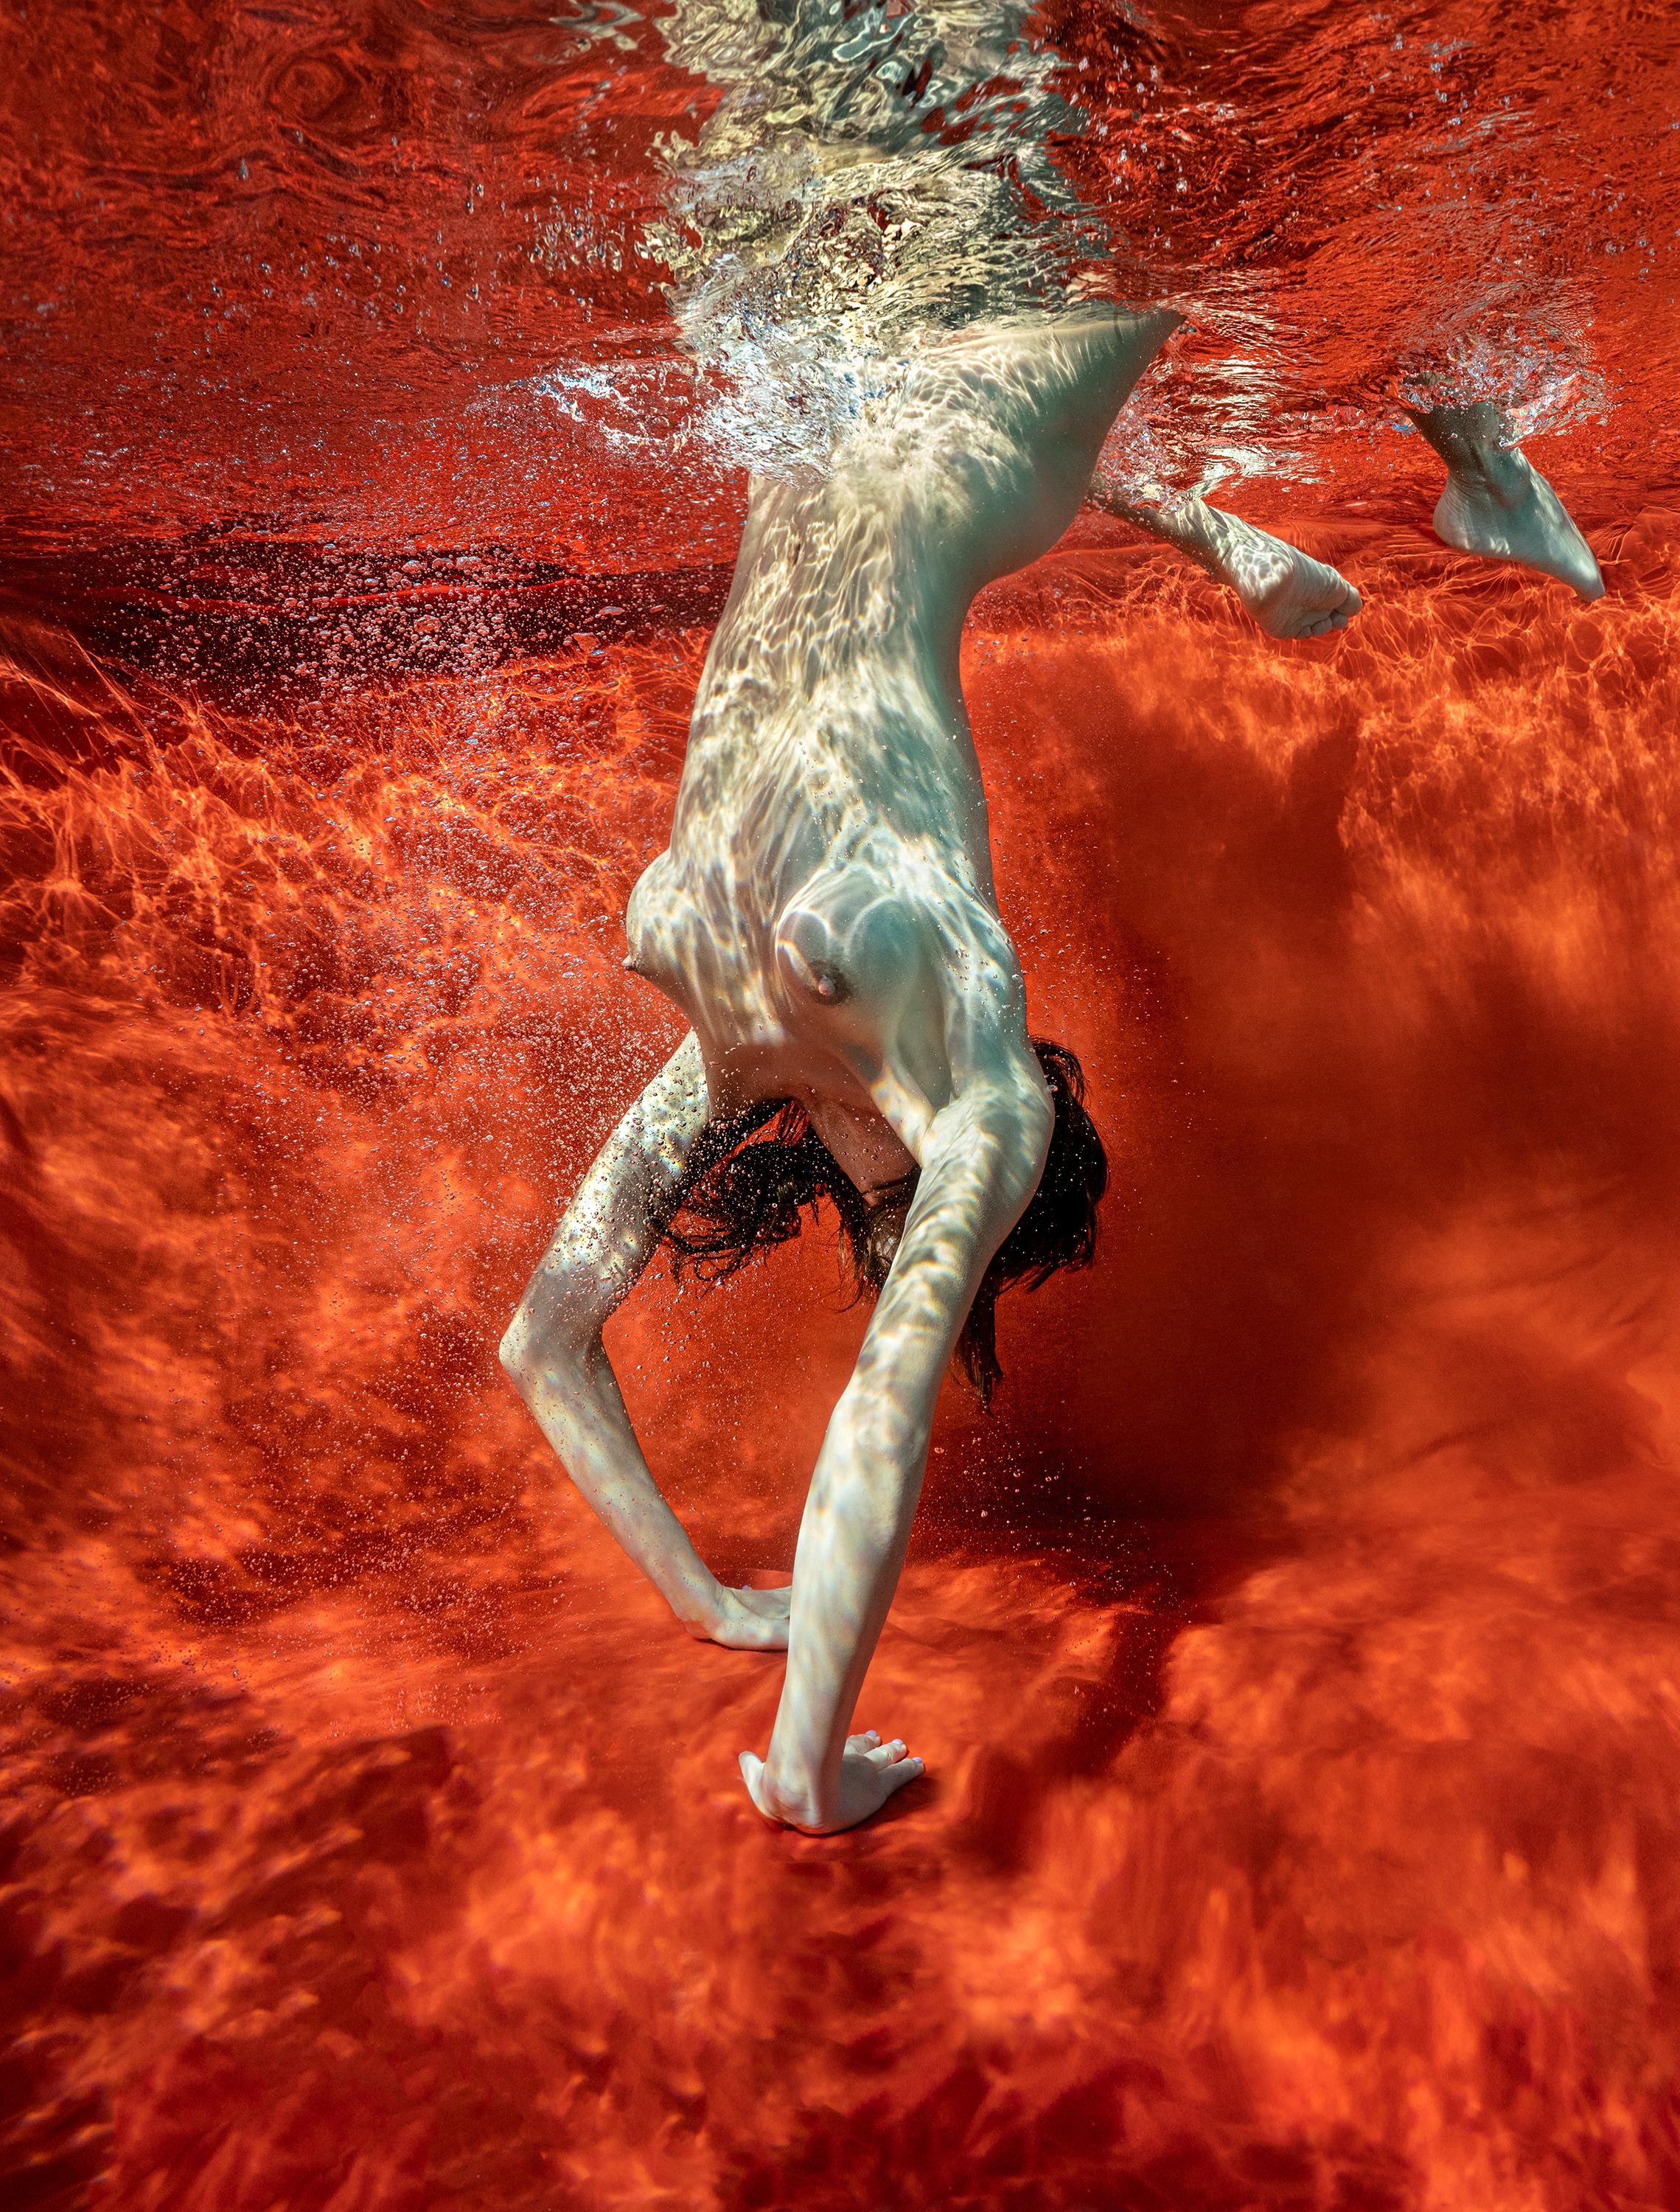 Alex Sher Nude Photograph - Blood and Milk VIII - underwater nude photograph - archival pigment print 24x18"